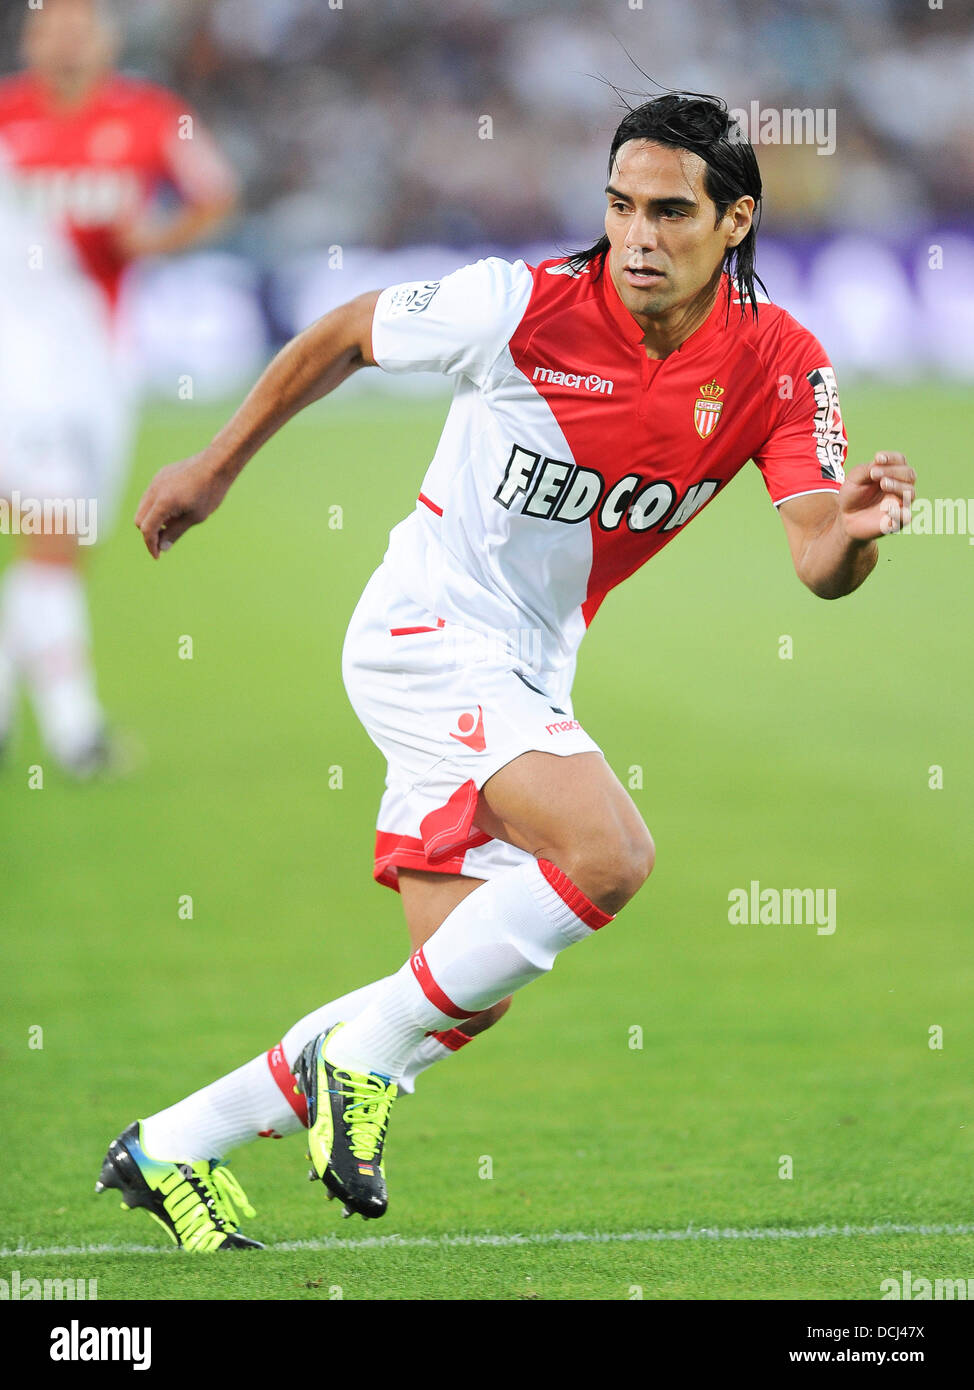 18.08.2013 Monaco. Radamel FALCAO during the French Ligue 1 game between Monaco and Montpellier from the Stade Louis II stadium. Stock Photo